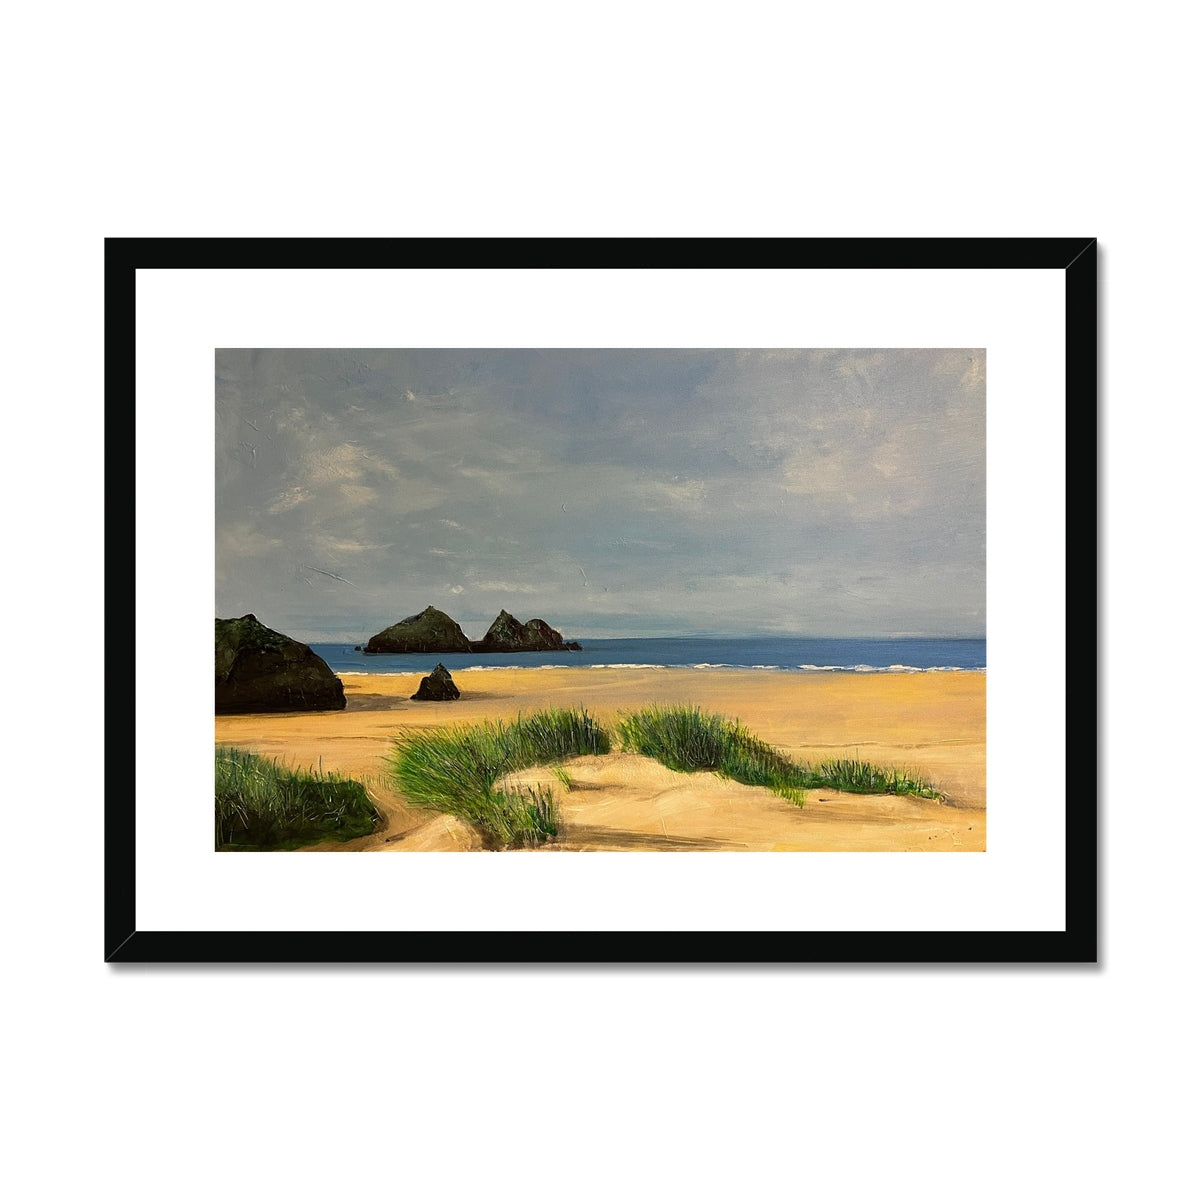 Holywell Bay Cornwall Painting | Framed & Mounted Prints From Scotland-Framed & Mounted Prints-World Art Gallery-A2 Landscape-Black Frame-Paintings, Prints, Homeware, Art Gifts From Scotland By Scottish Artist Kevin Hunter